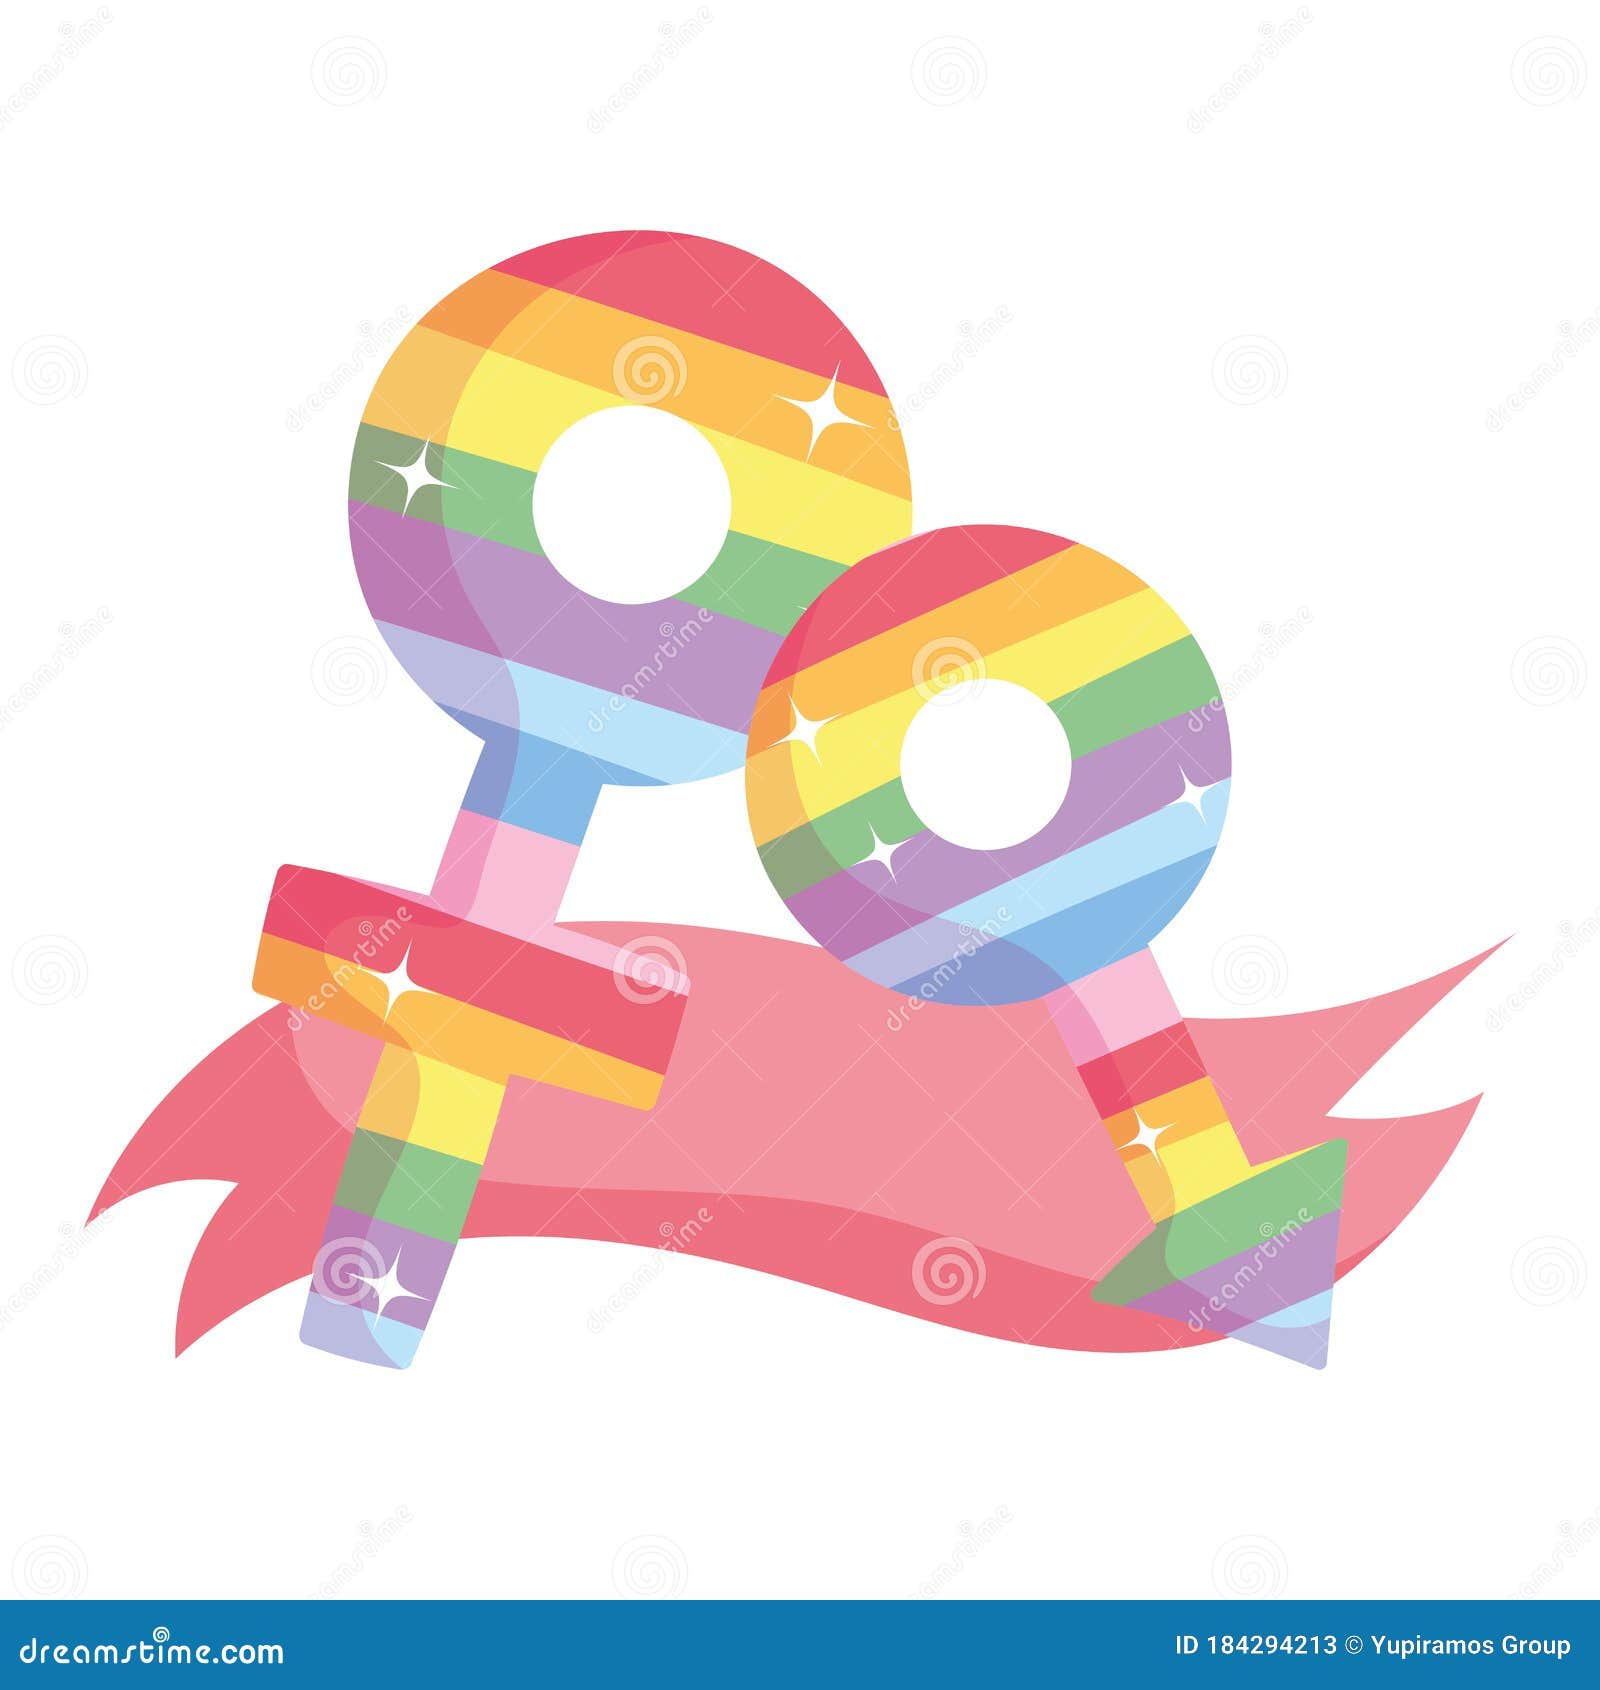 Lgtbi Female And Male Gender With Ribbon Vector Design Stock Vector Illustration Of Vector